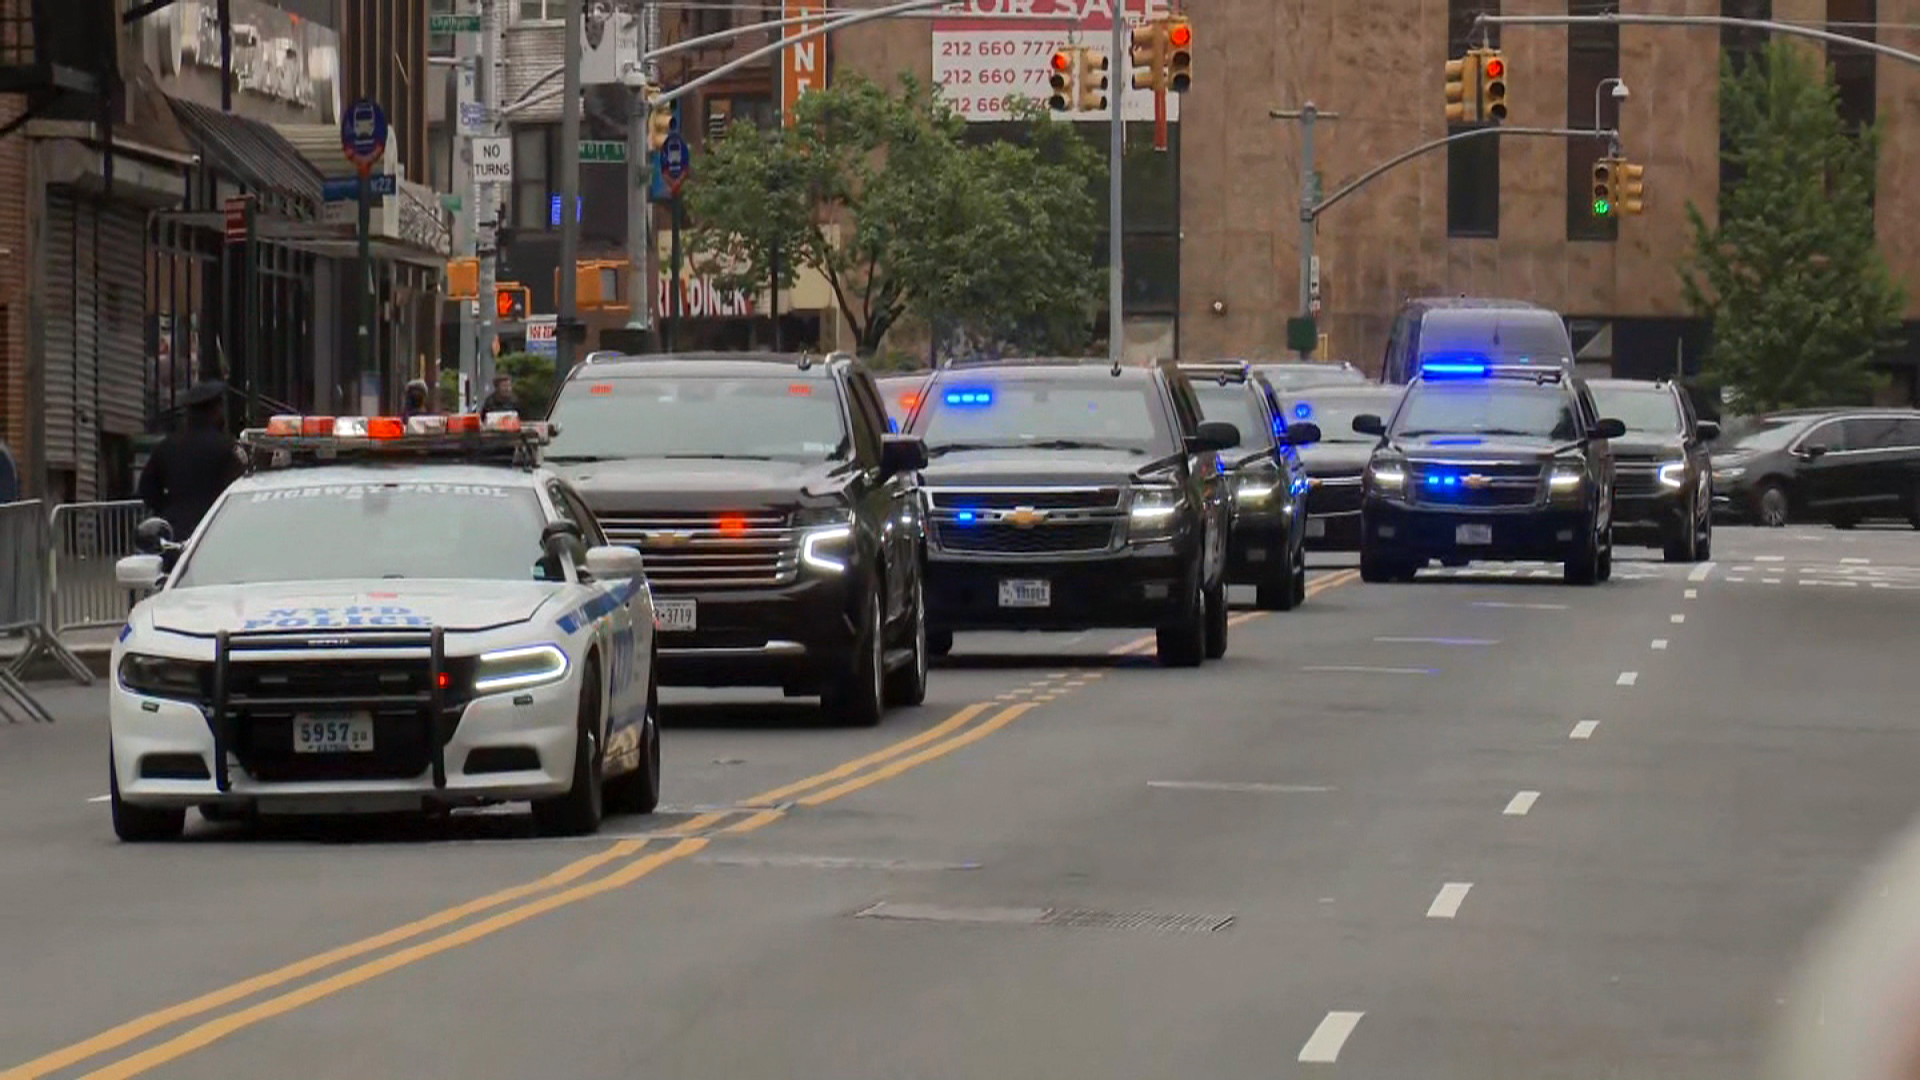 Former President Donald Trump's motorcade arrives at court in Manhattan on Tuesday.